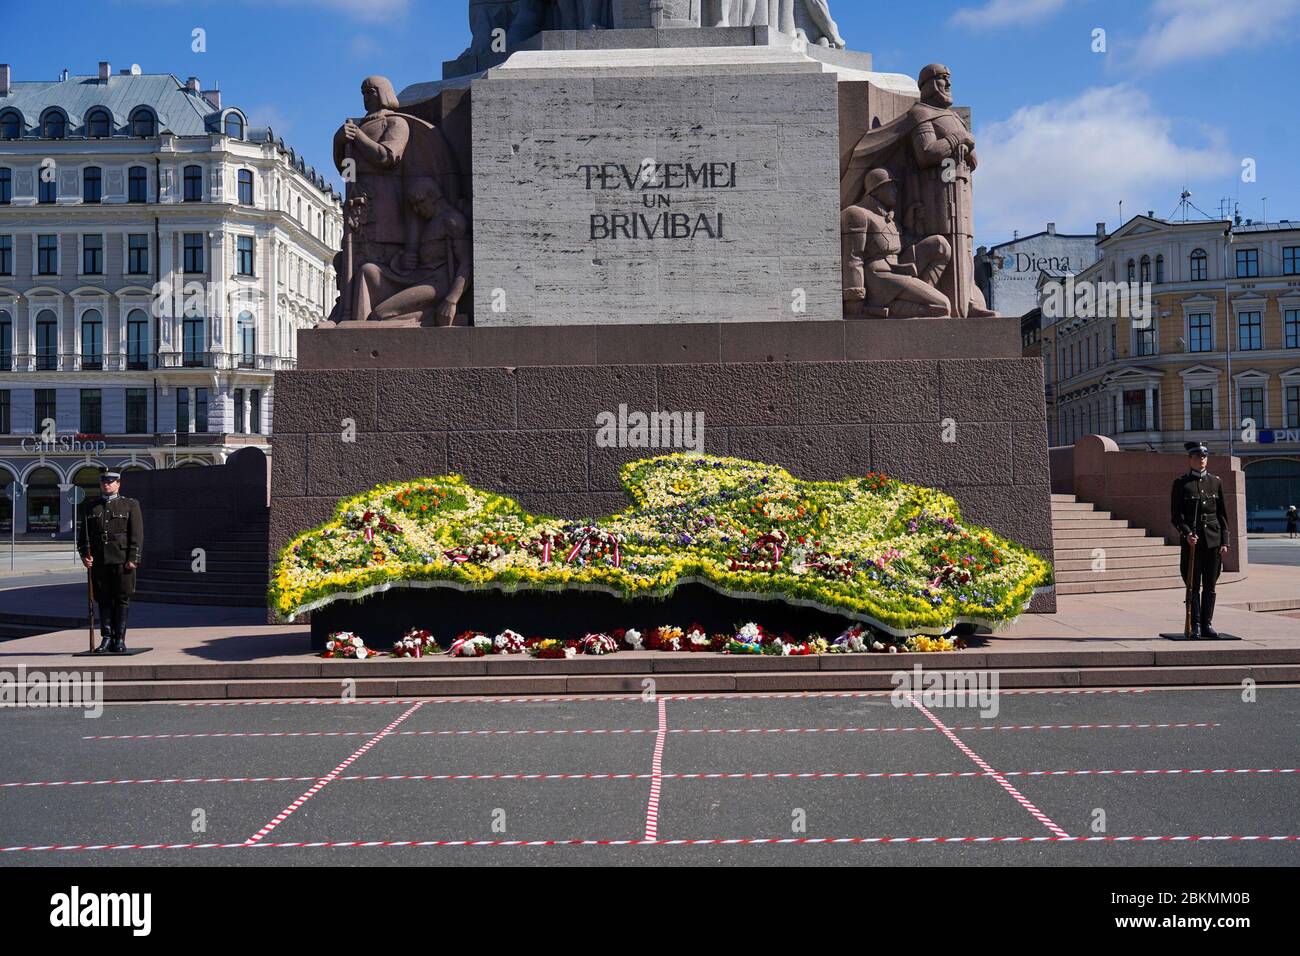 Riga. 4th May, 2020. A flower bed in shape of a Latvian map is set up in front of the Freedom Monument in Riga, Latvia, May 4, 2020, as the country marks the 30th anniversary of its declaration of independence. May 4 is celebrated by Latvians to mark the day the country declared independence from the former Soviet Union in 1990. Due to the COVID-19 pandemic, national-wide celebrations this year mostly took place at home as all annual events were cancelled. Credit: Janis Laizans/Xinhua/Alamy Live News Stock Photo